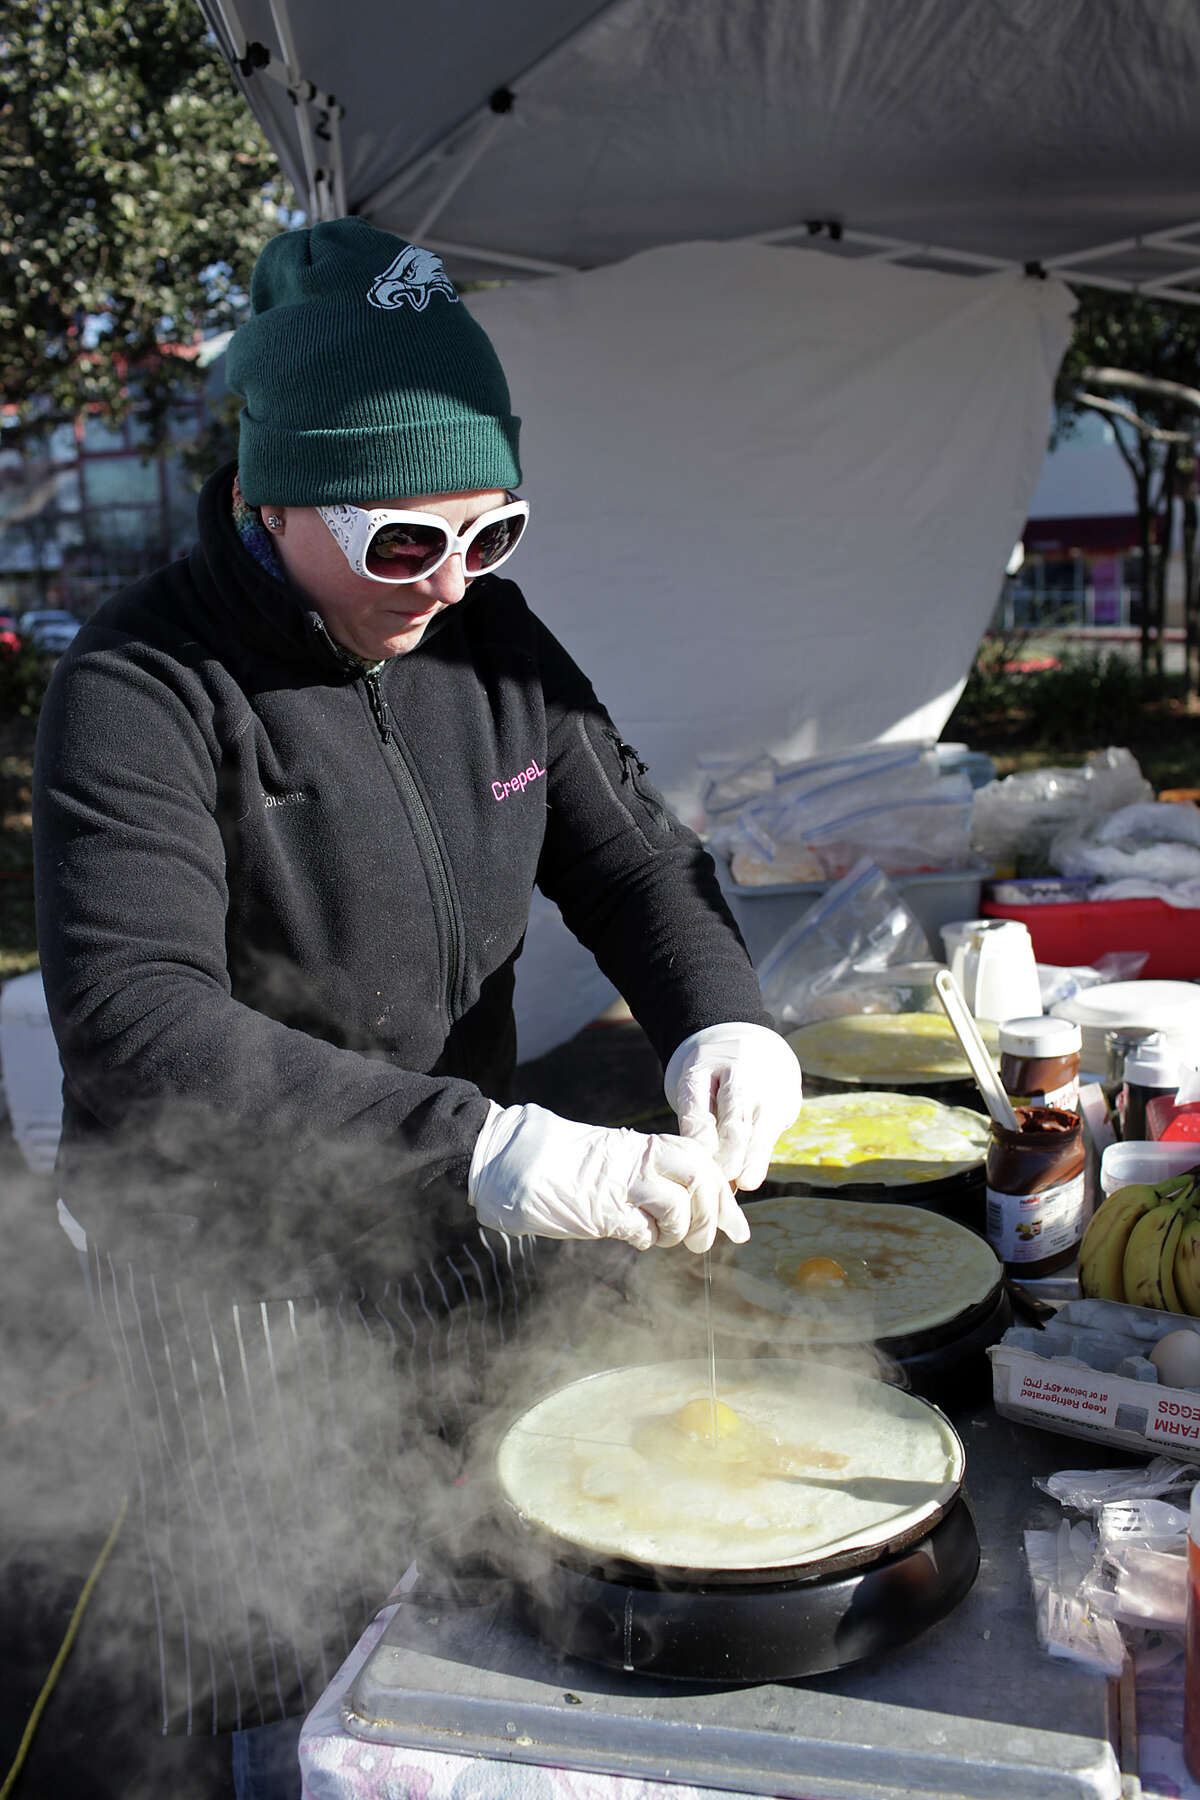 In this 2013 photo, chef Marissa Schaeffer cooks up crepes at the Good Gluten Free Foods booth at the now-defunct Alamo Quarry Farmer's Market. A new regulation passed in October added a new fee to vendors cooking or warming up food at San Antonio’s farmers markets.